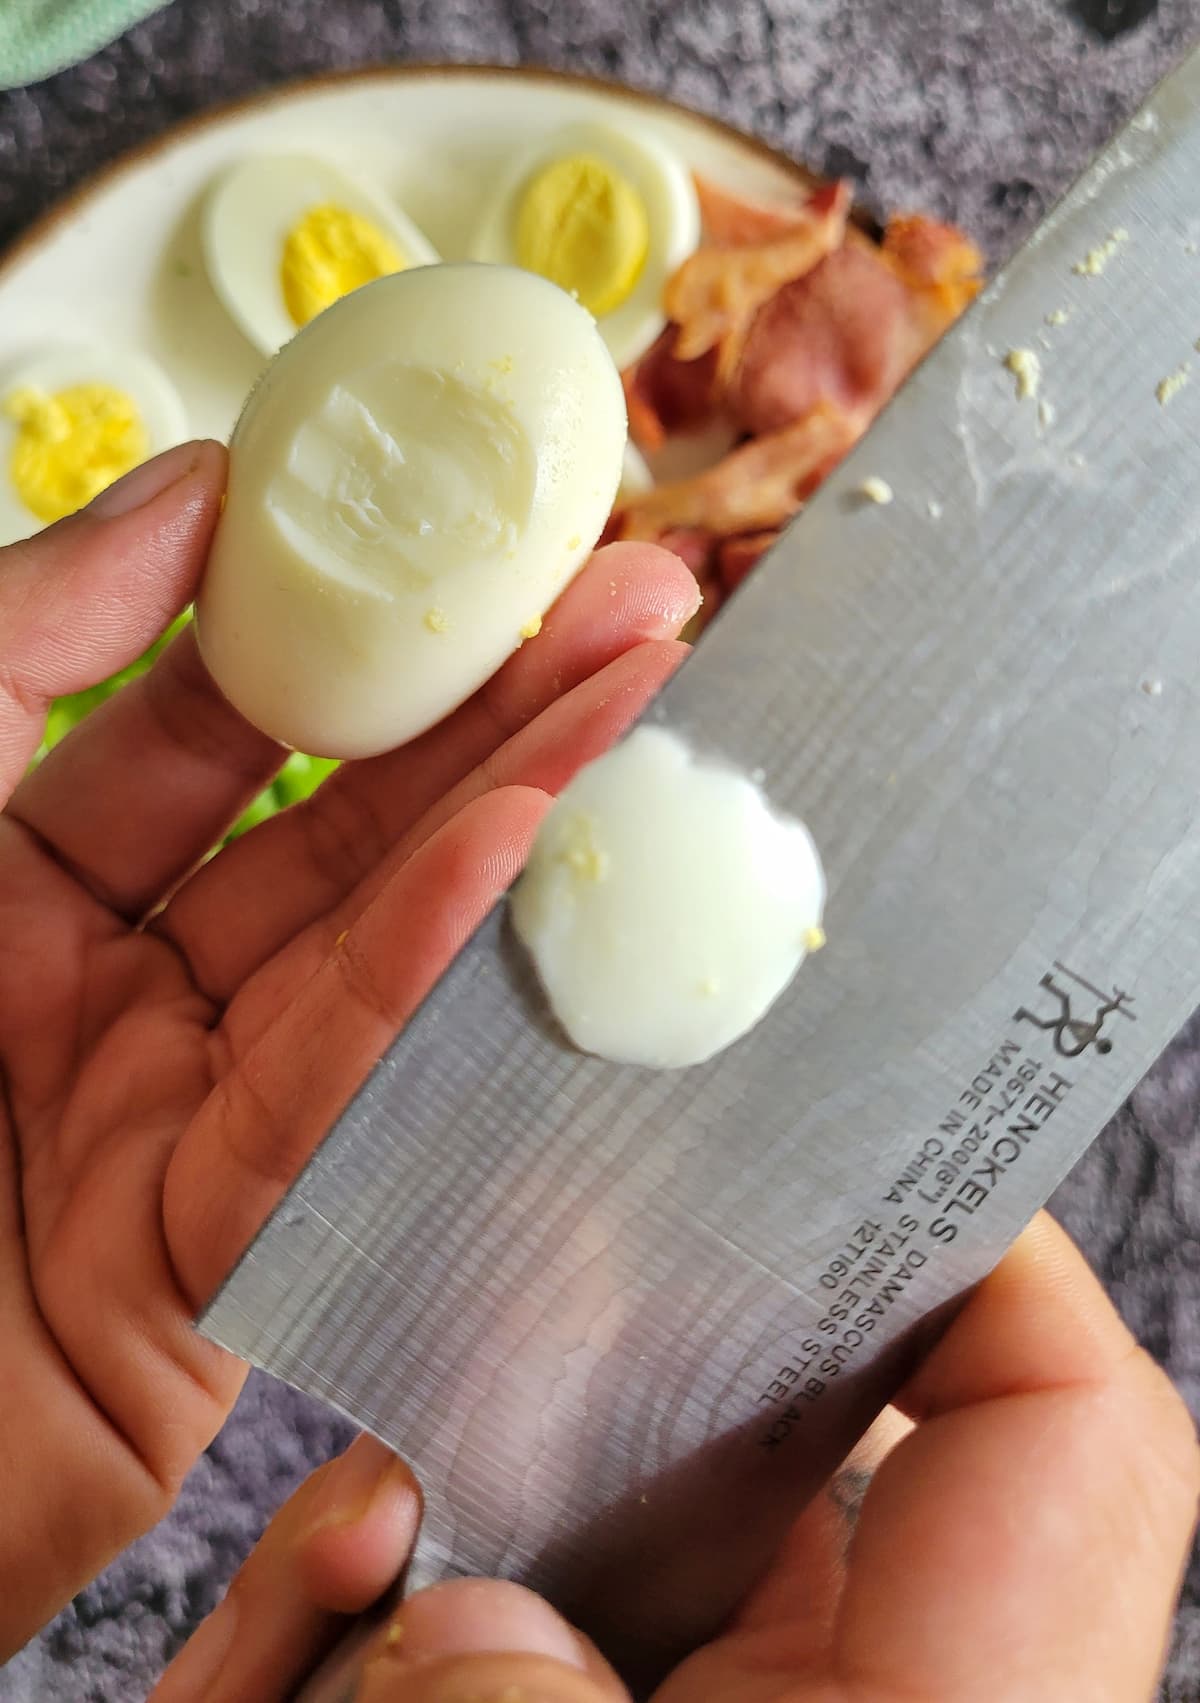 hand with a knife in one hand and a sliced hard boiled egg in the other, slice of the egg on the knife